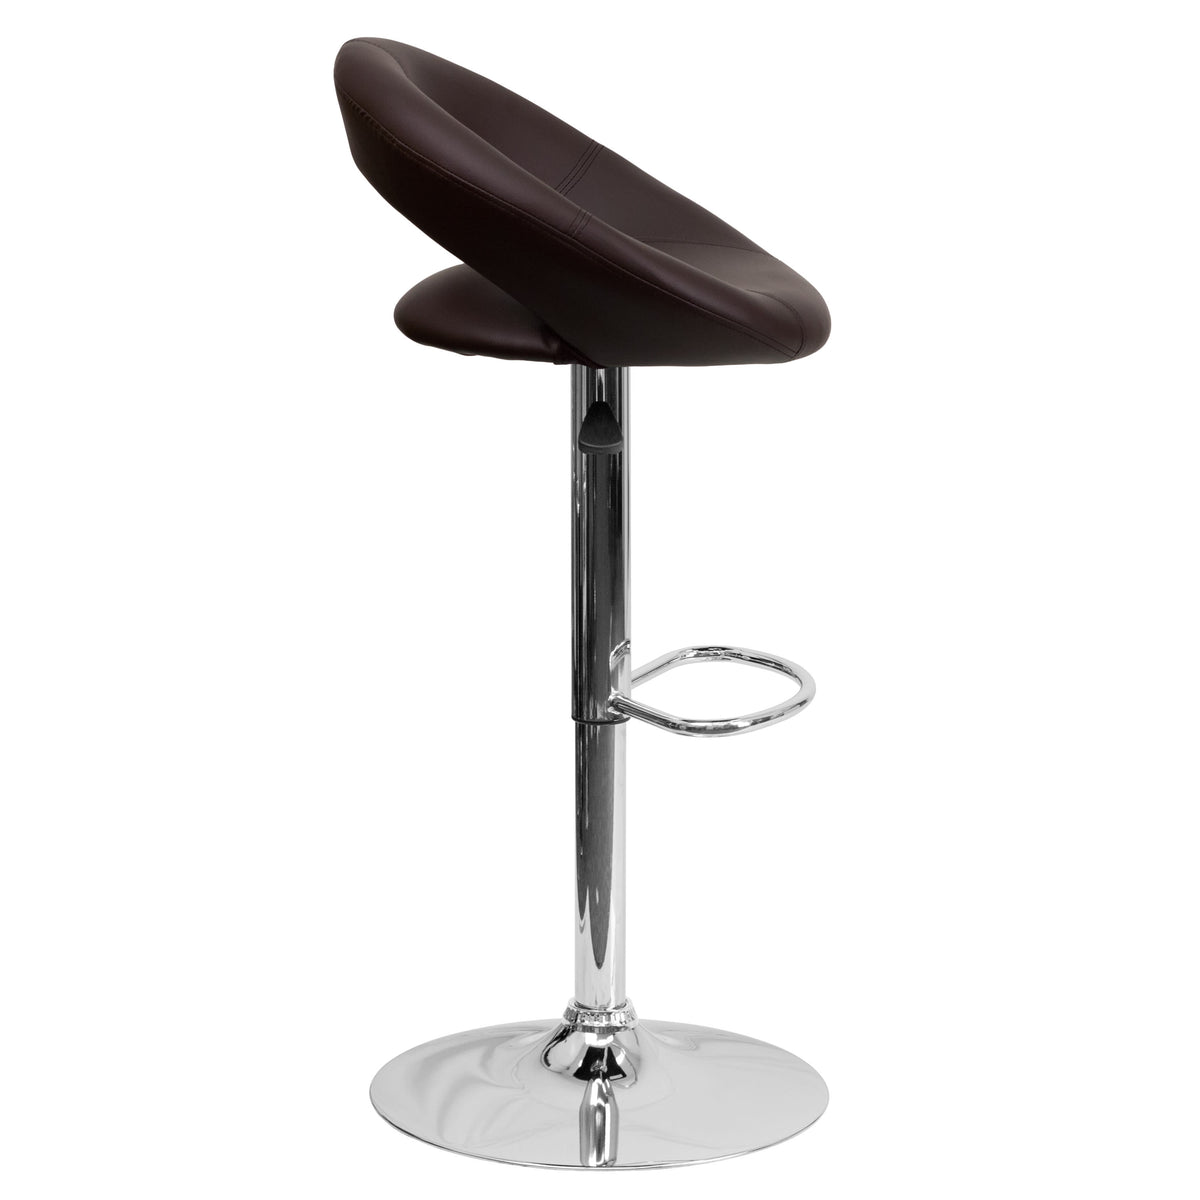 Brown |#| Brown Vinyl Rounded Orbit-Style Back Adjustable Height Barstool w/ Chrome Base